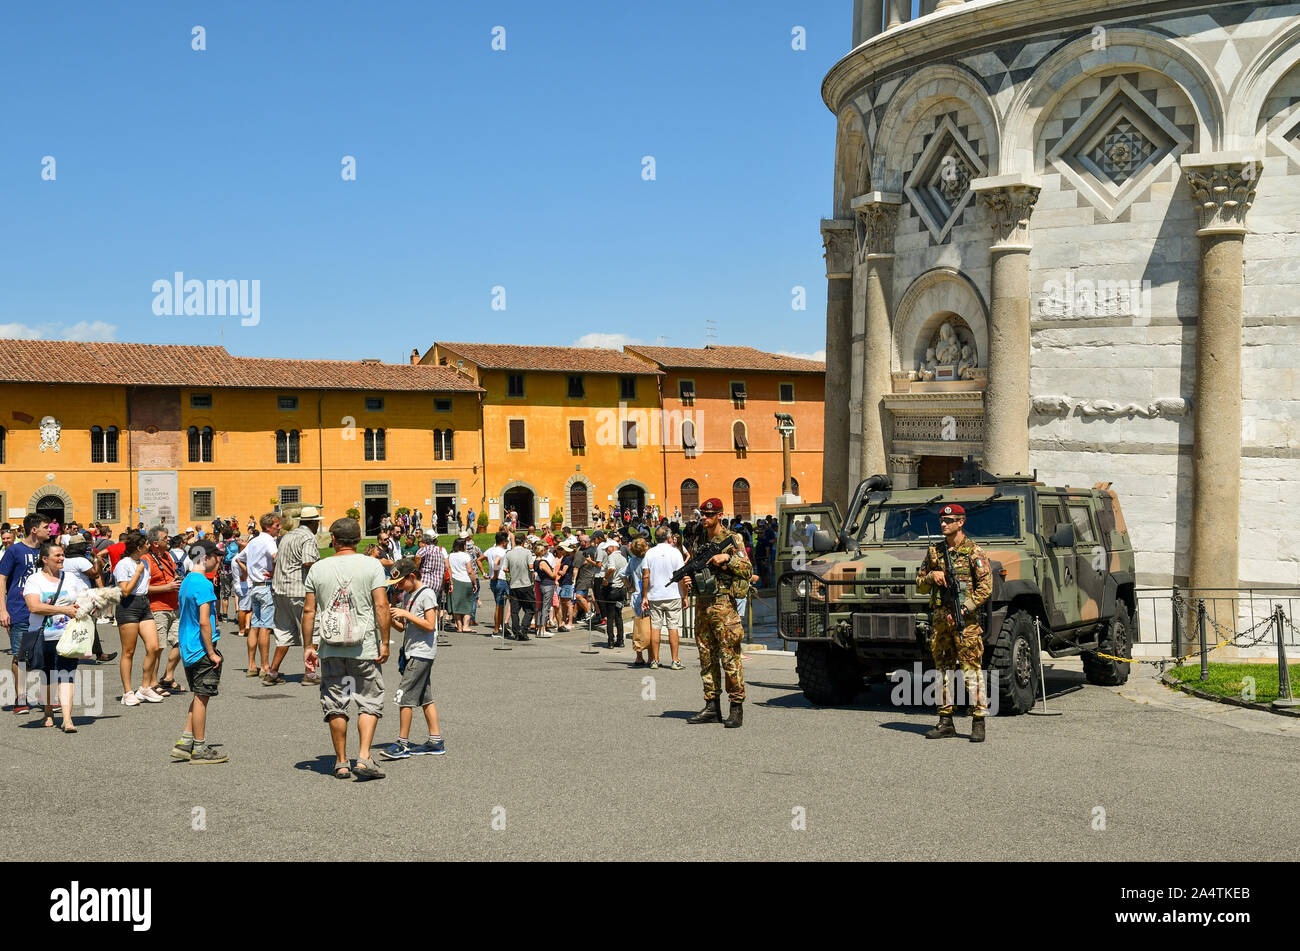 Soldiers of Italian army with a military vehicle Iveco LMV in front of the famous Leaning Tower of Pisa, Unesco World Heritage Site, Tuscany, Italy Stock Photo